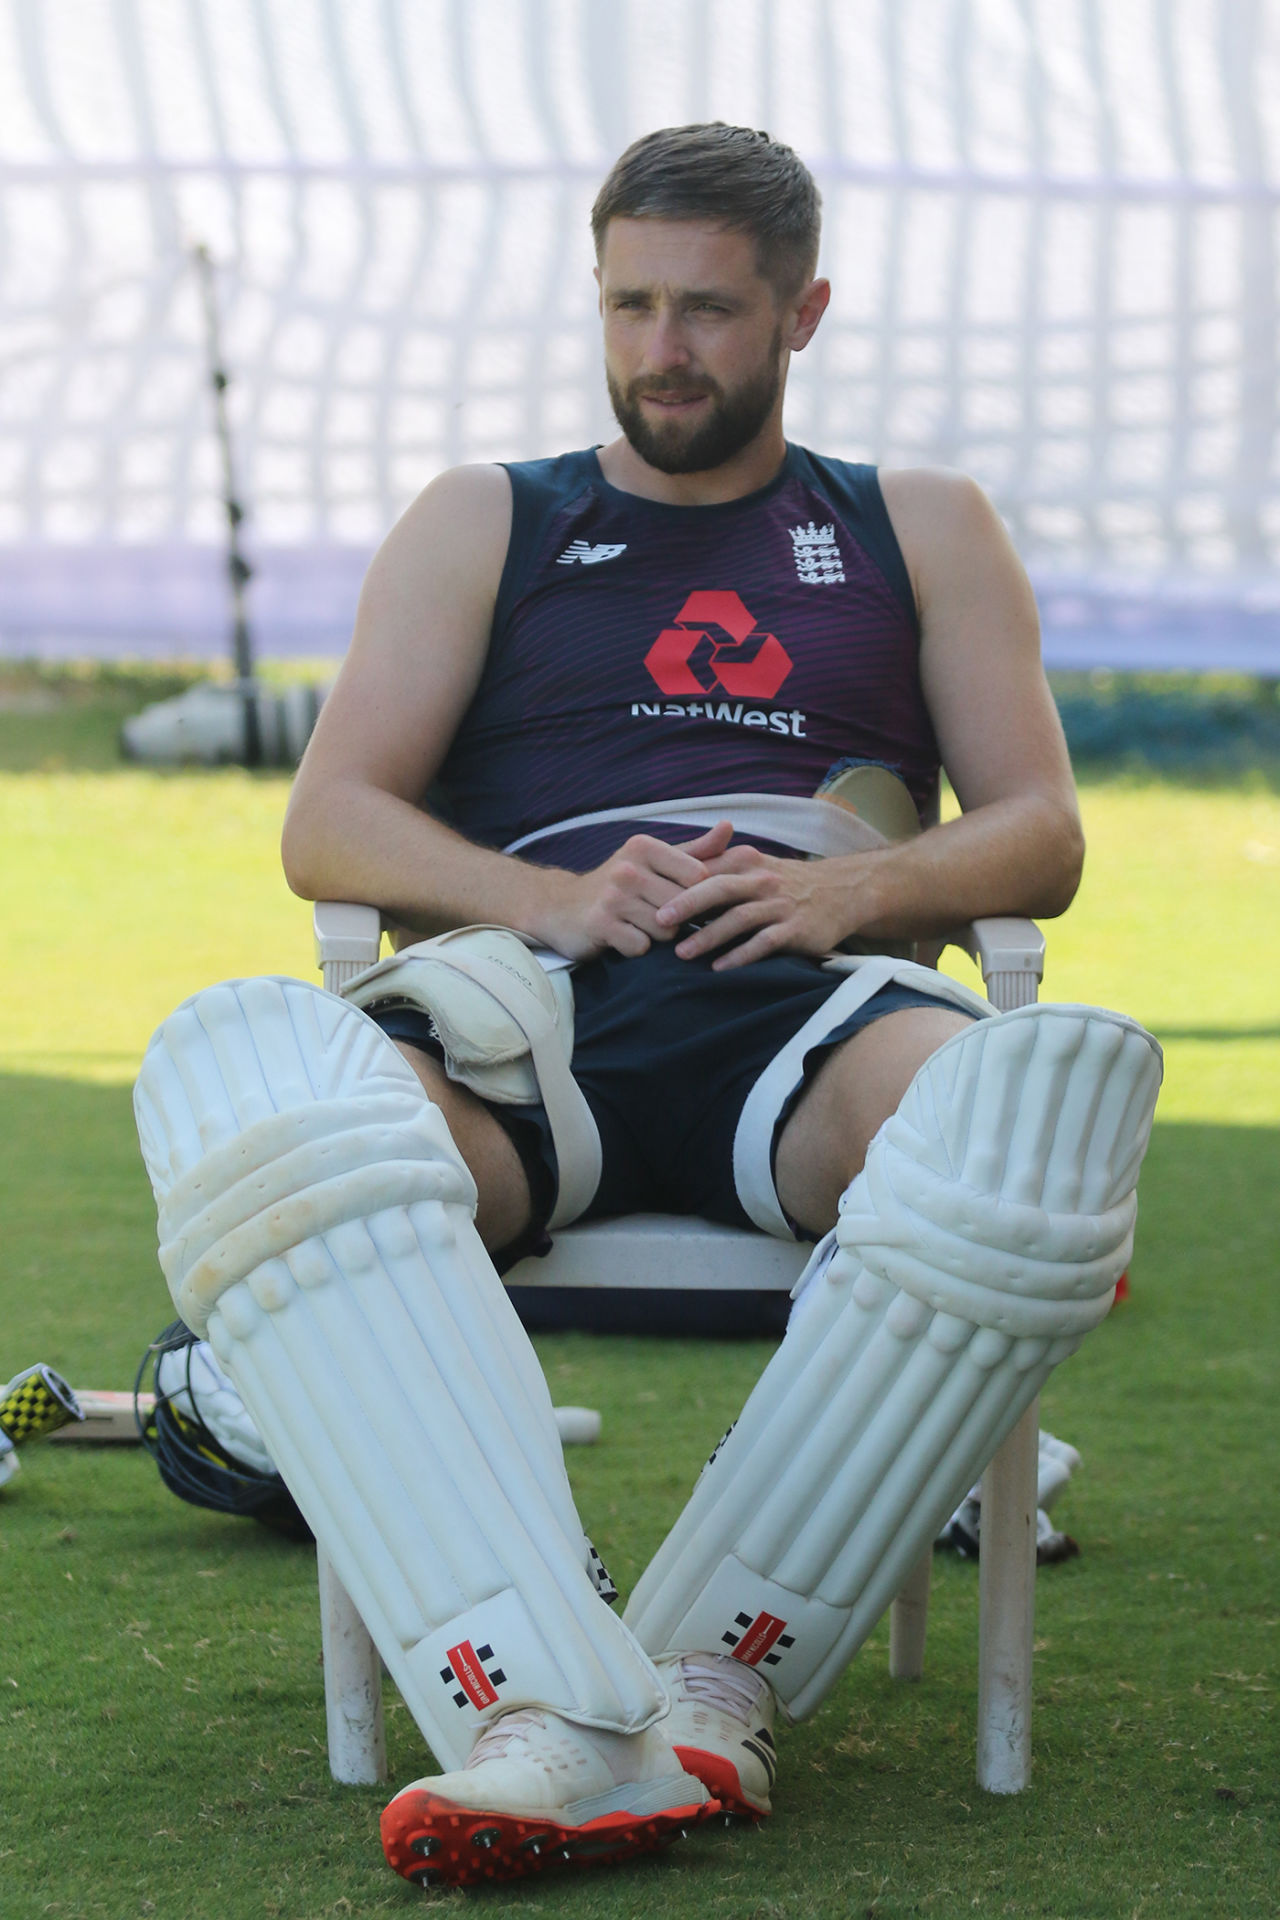 Chris Woakes was named in England's 12-man squad for the second Test, England training, Chennai, February 12, 2021